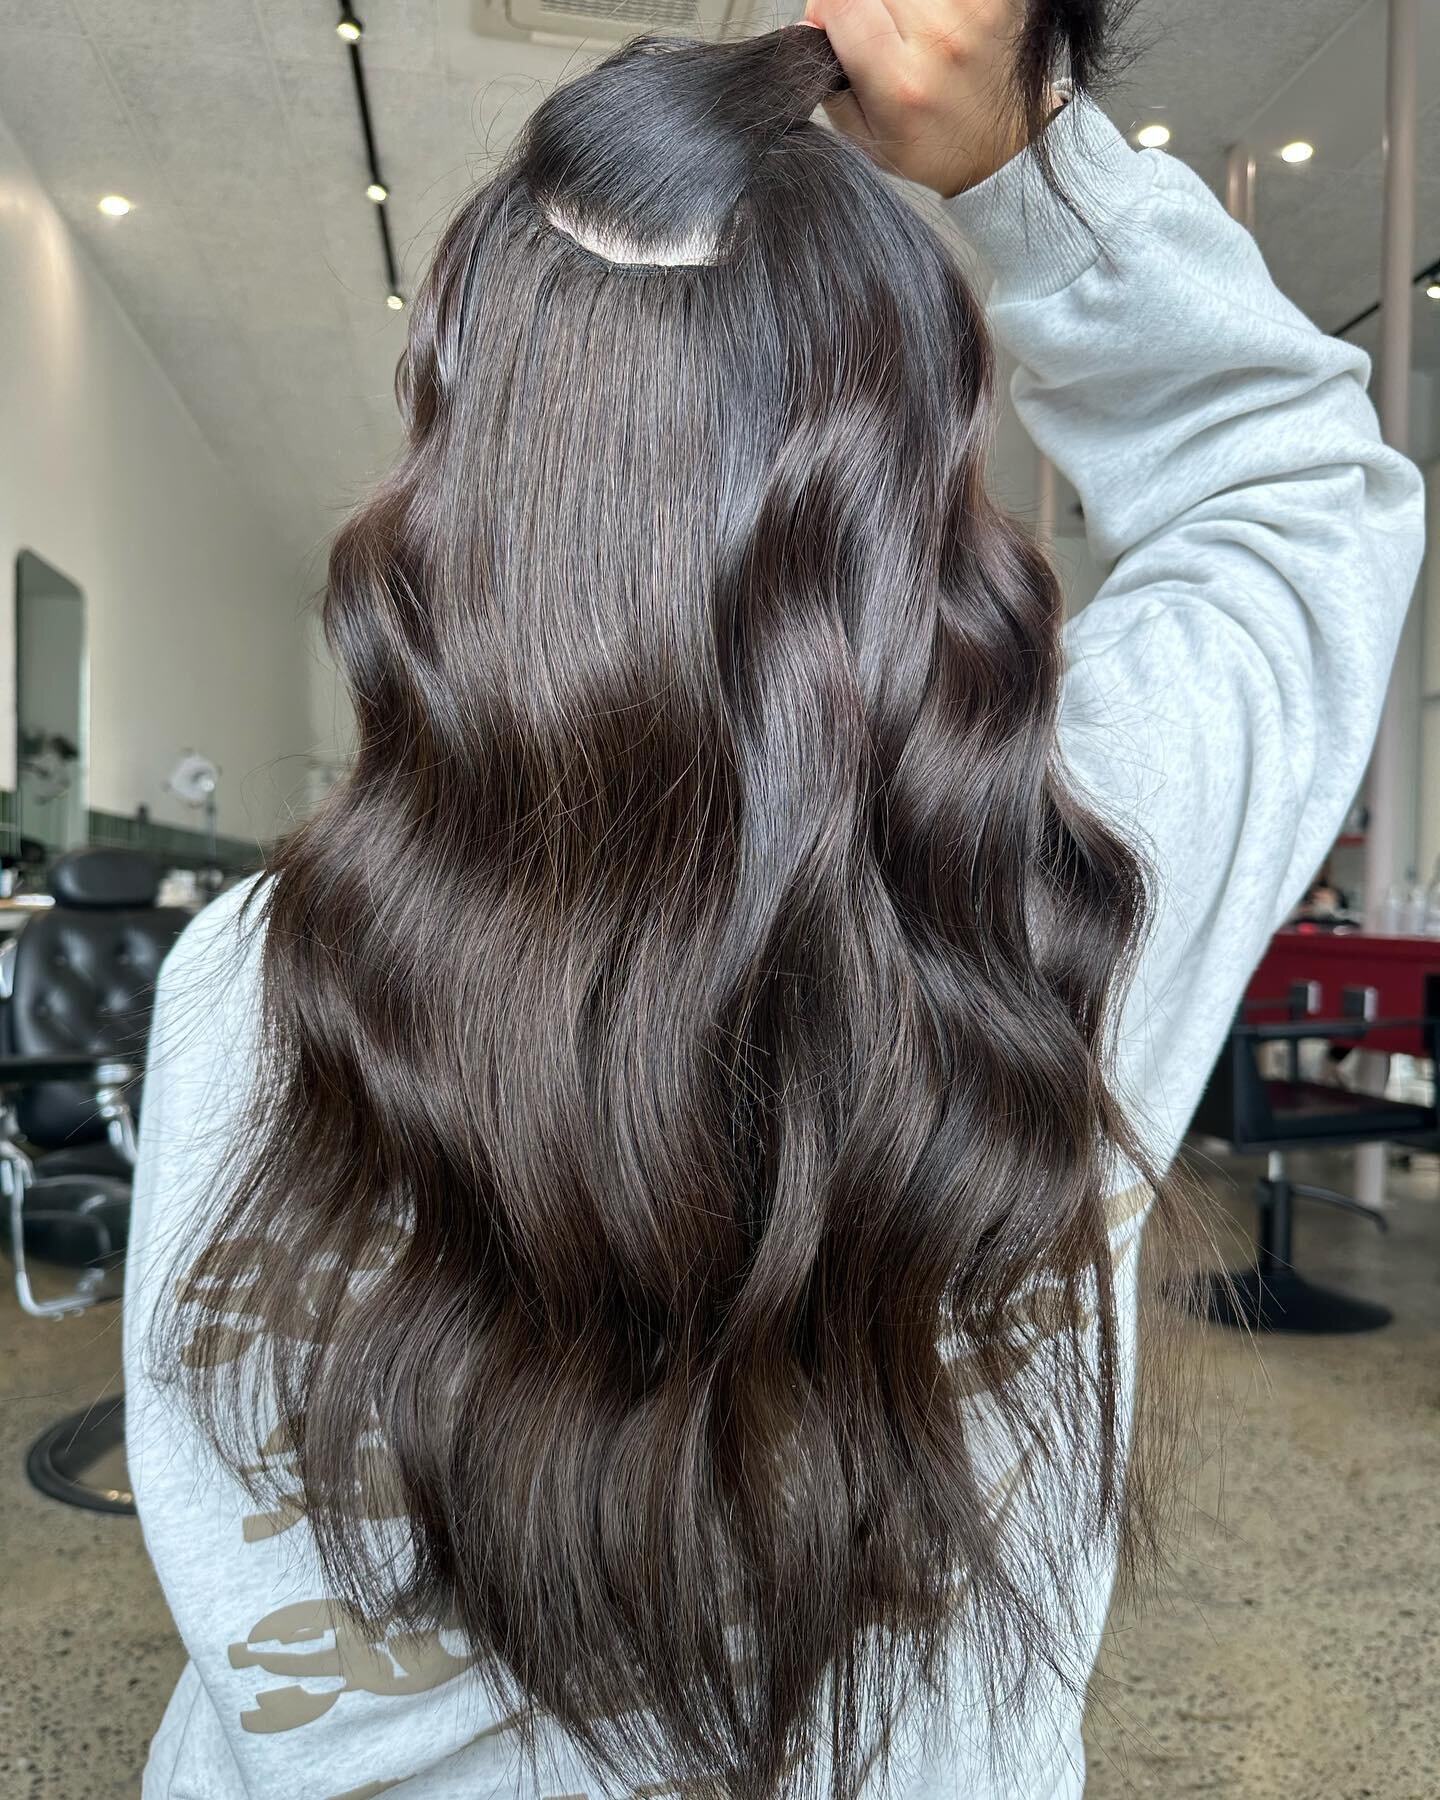 WANTING LONGER, THICKER, LUSCIOUS LOCKS? ASK US HOW!! you can achieve all of your hair goals with weft hair extensions 
📞 0450 566 437

COLOURED W// @keuneanz 
STYLED W// @davroe @hottoolsproau